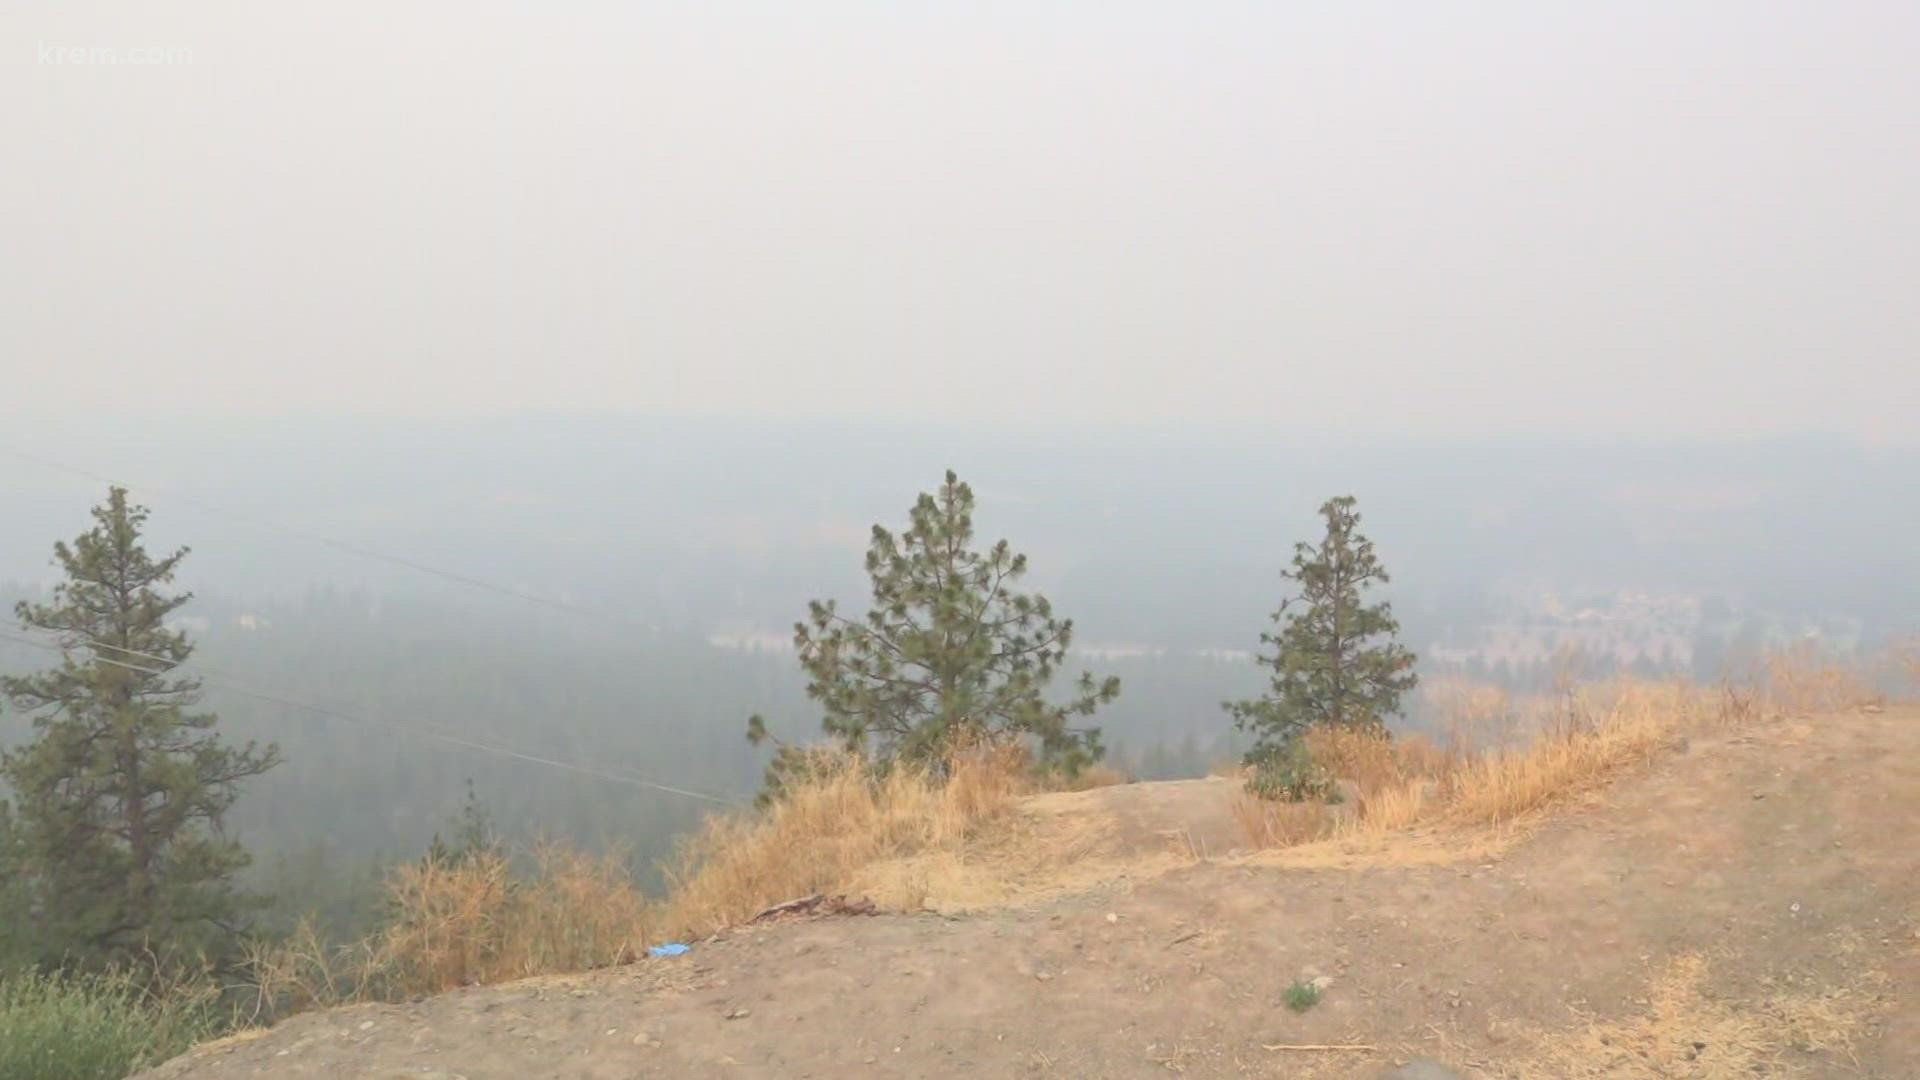 Temperatures climb to the 100s as wildfire smoke creates unhealthy air conditions.